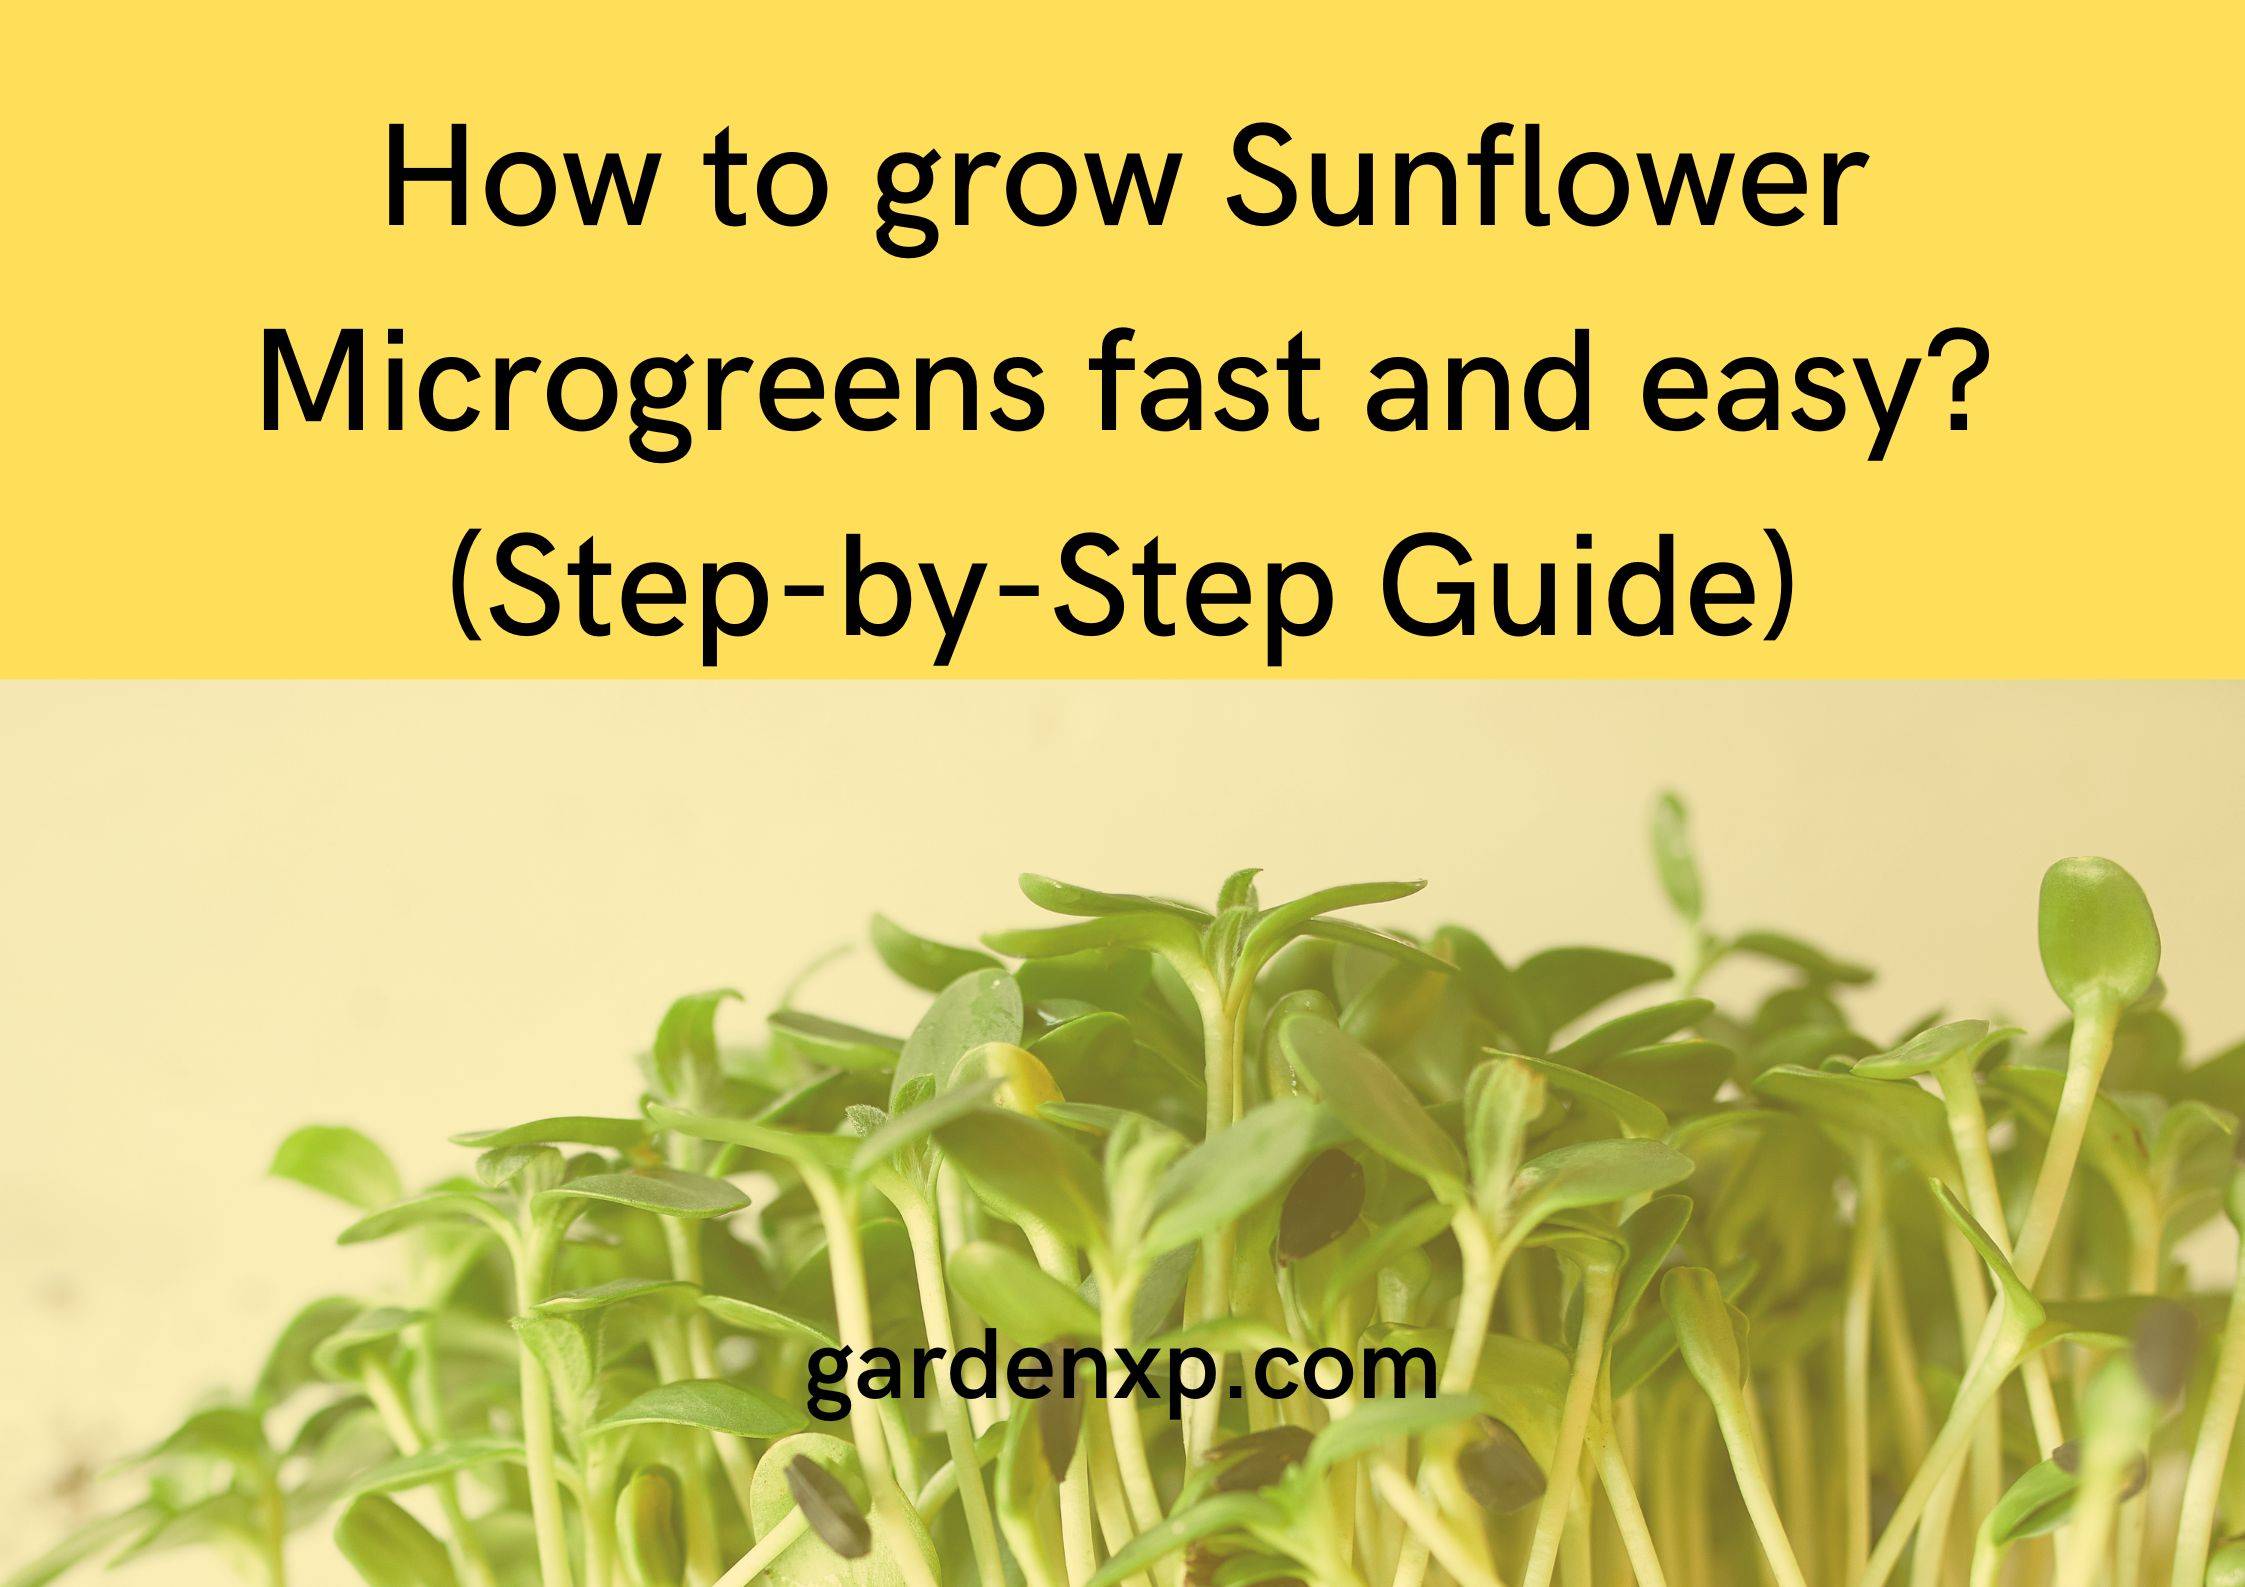 How to grow Sunflower Microgreens fast and easy? (Step-by-Step Guide)